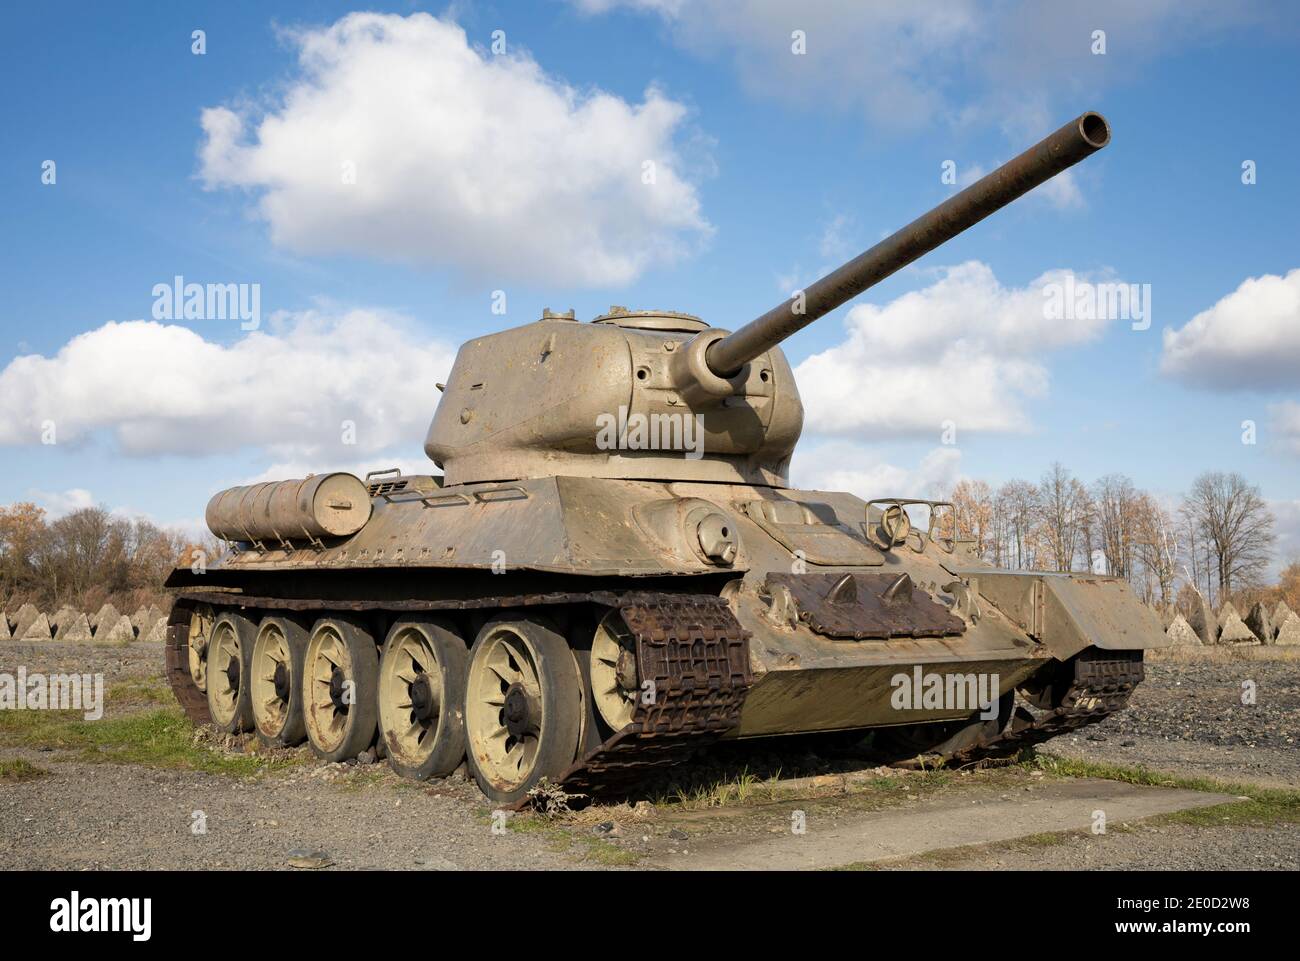 Old aged soviet tank from second world war - armored fighting vehicle with continuous track and cannon. Stock Photo